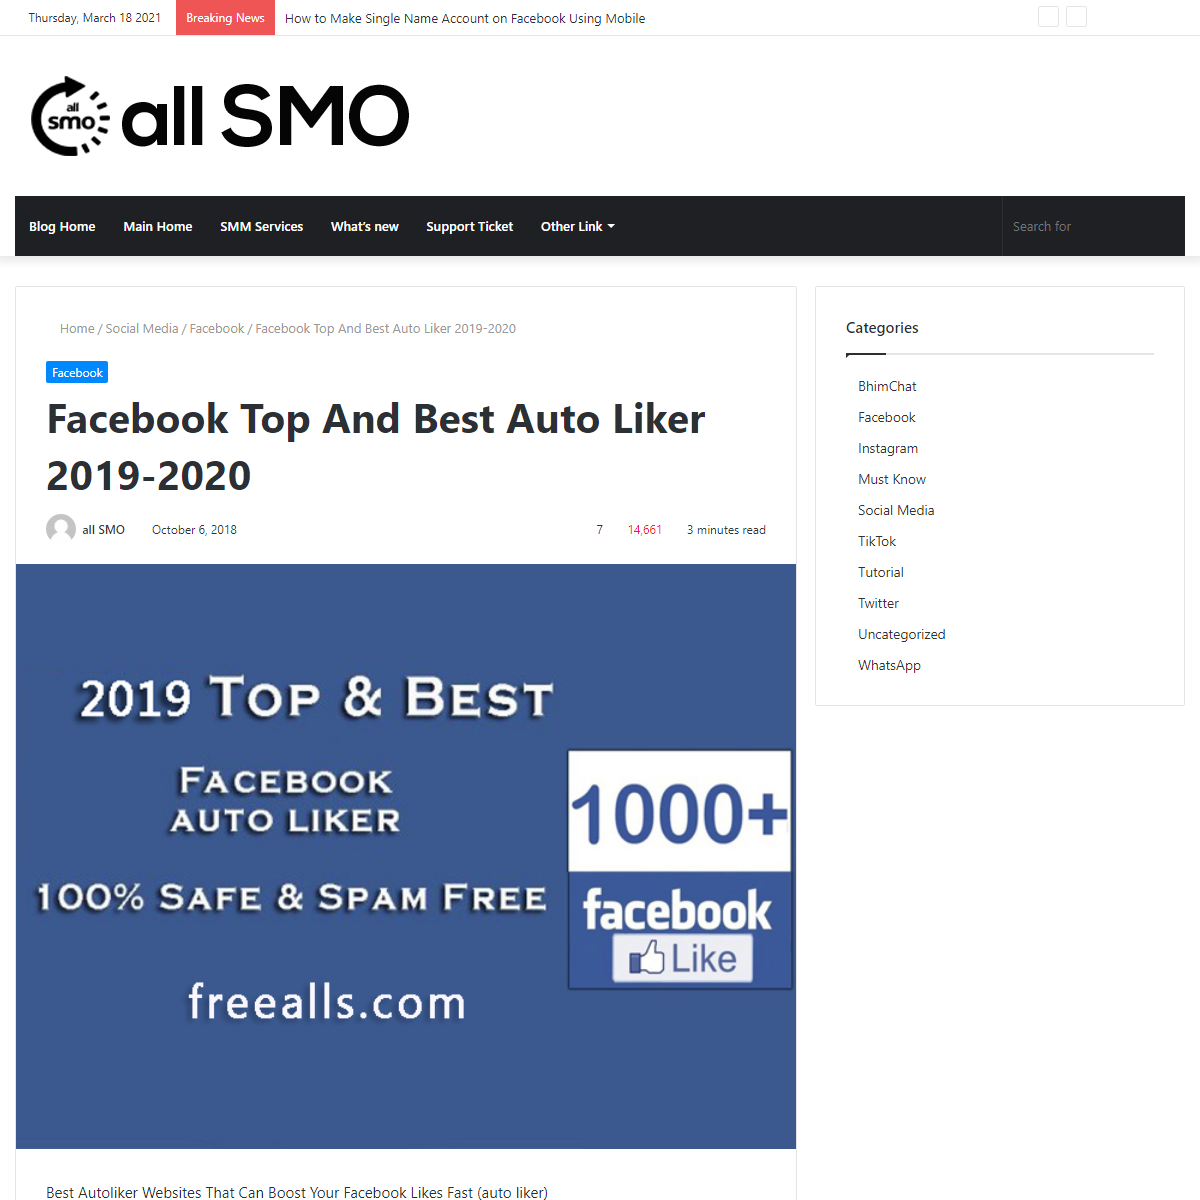 A complete backup of https://blog.allsmo.com/facebook-top-and-best-auto-liker-2018-2019/